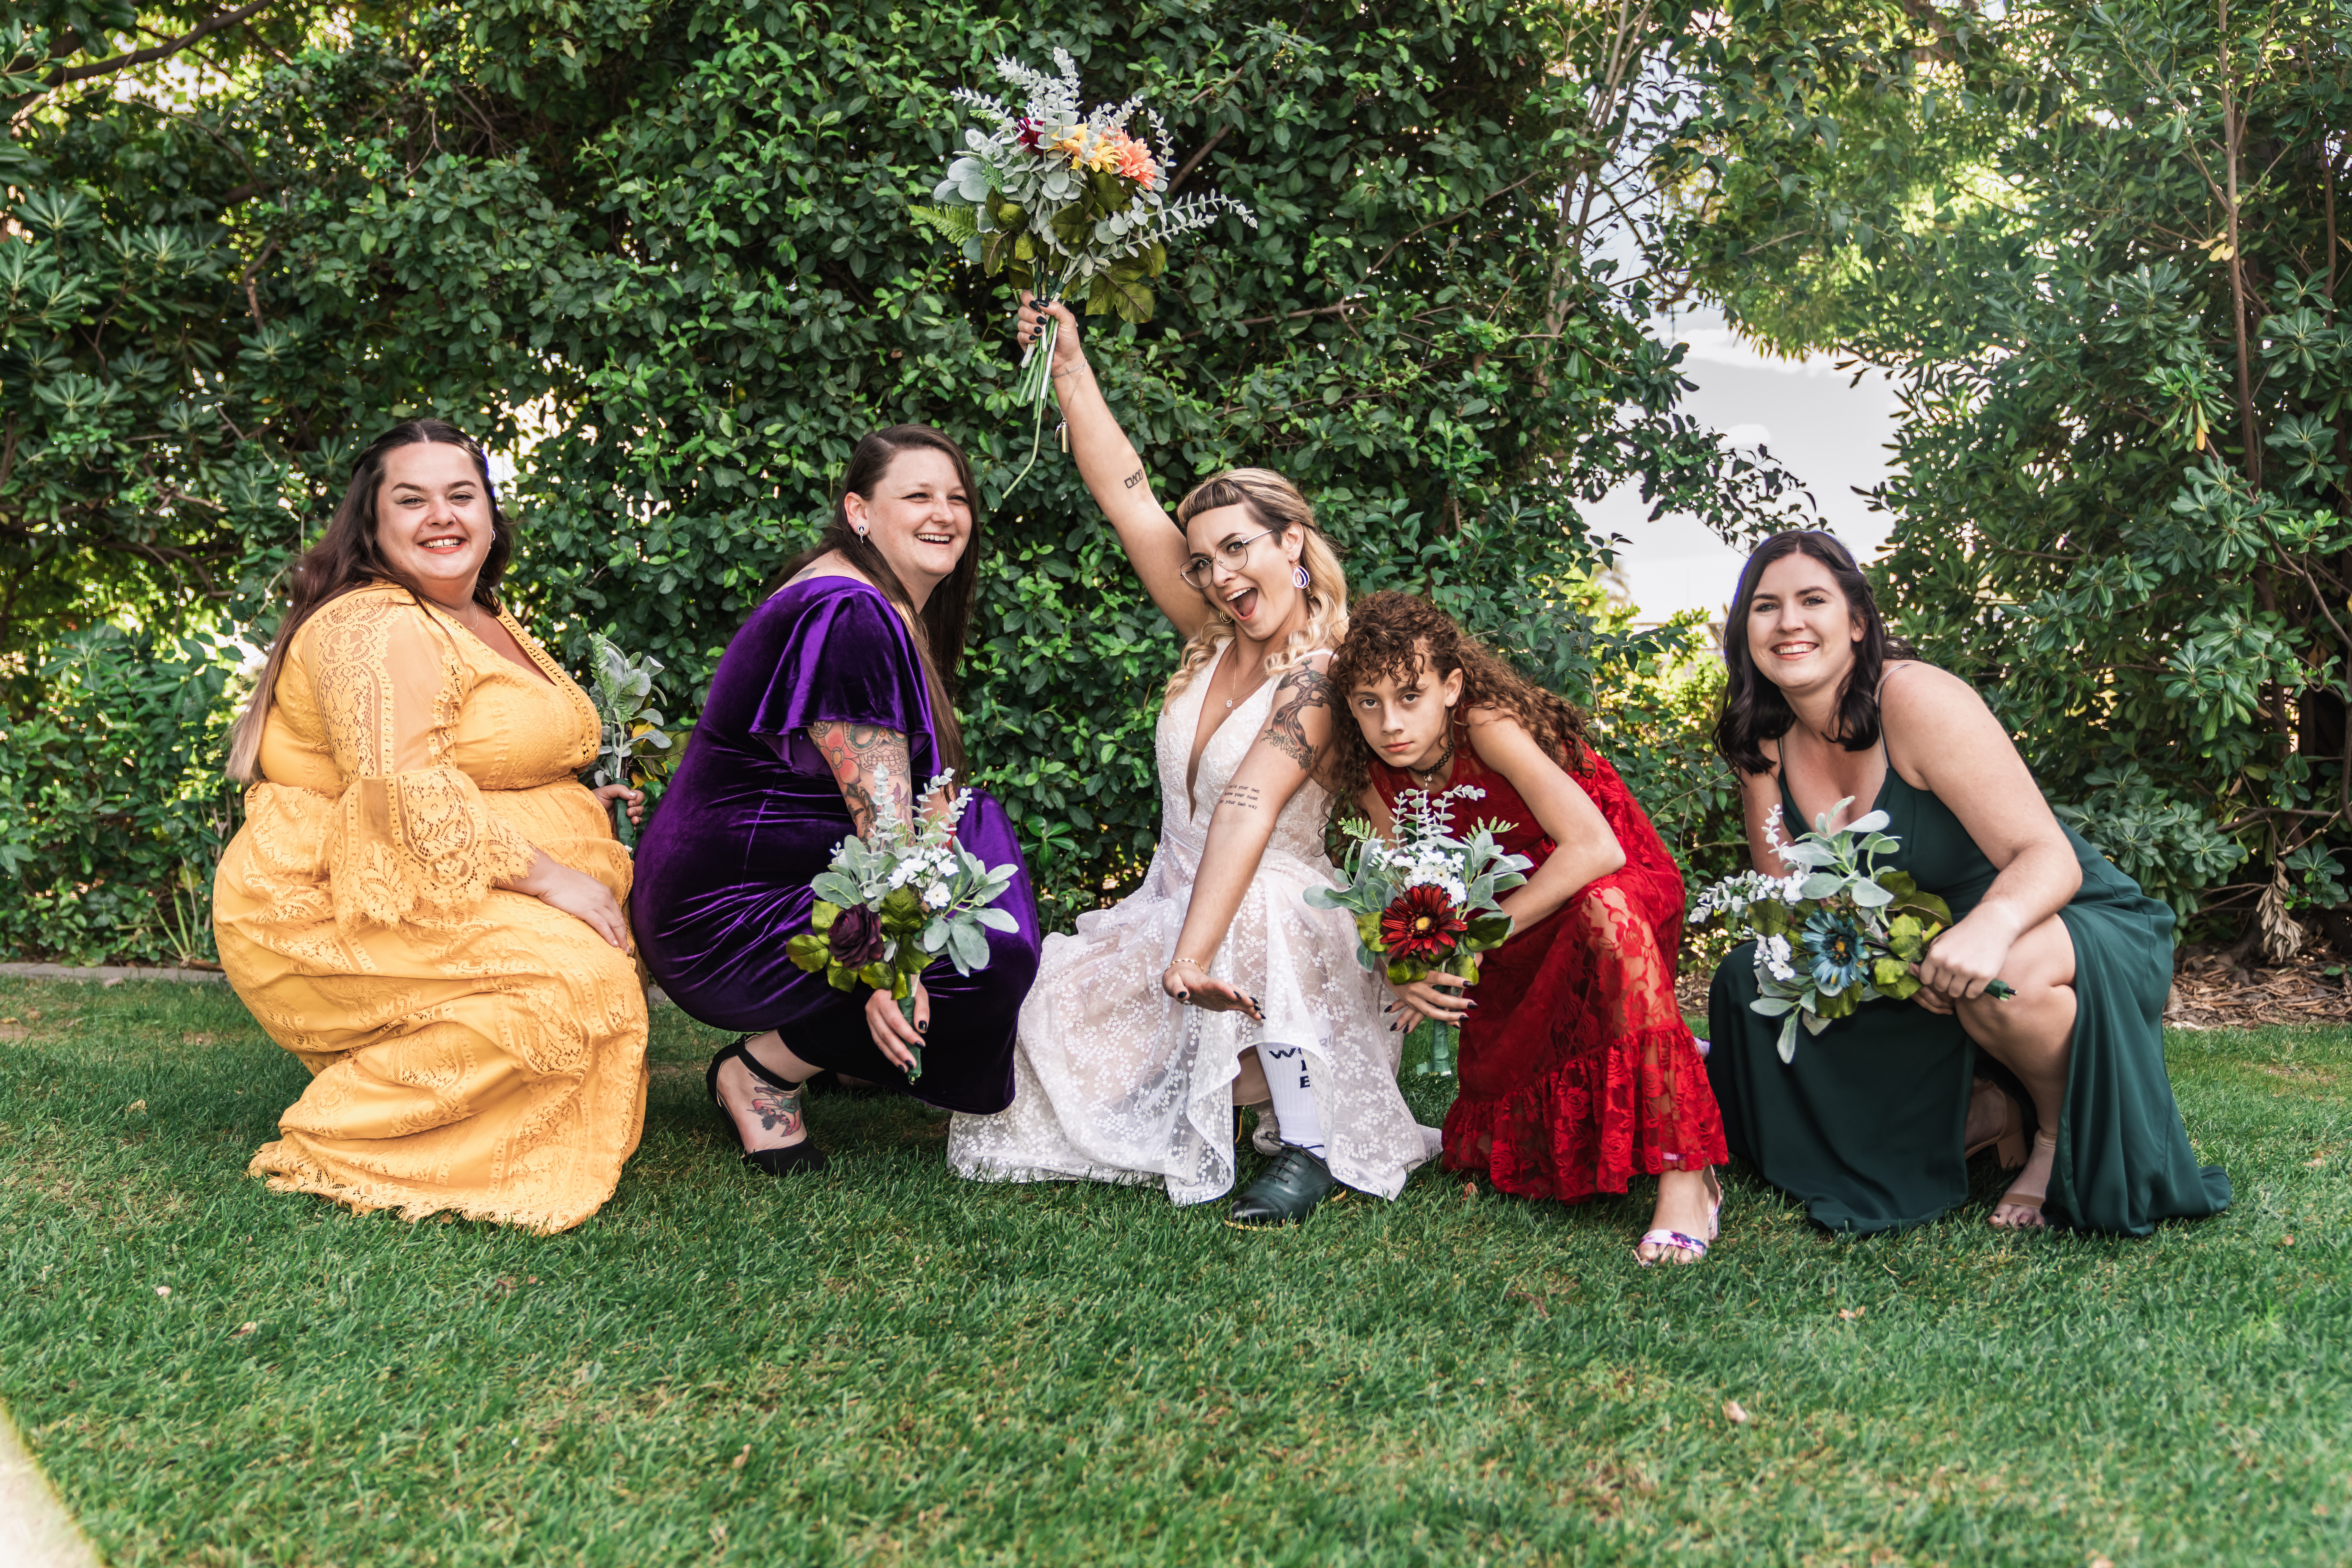 bride with wedding party - 15 Ways to Make Your Wedding More Inclusive